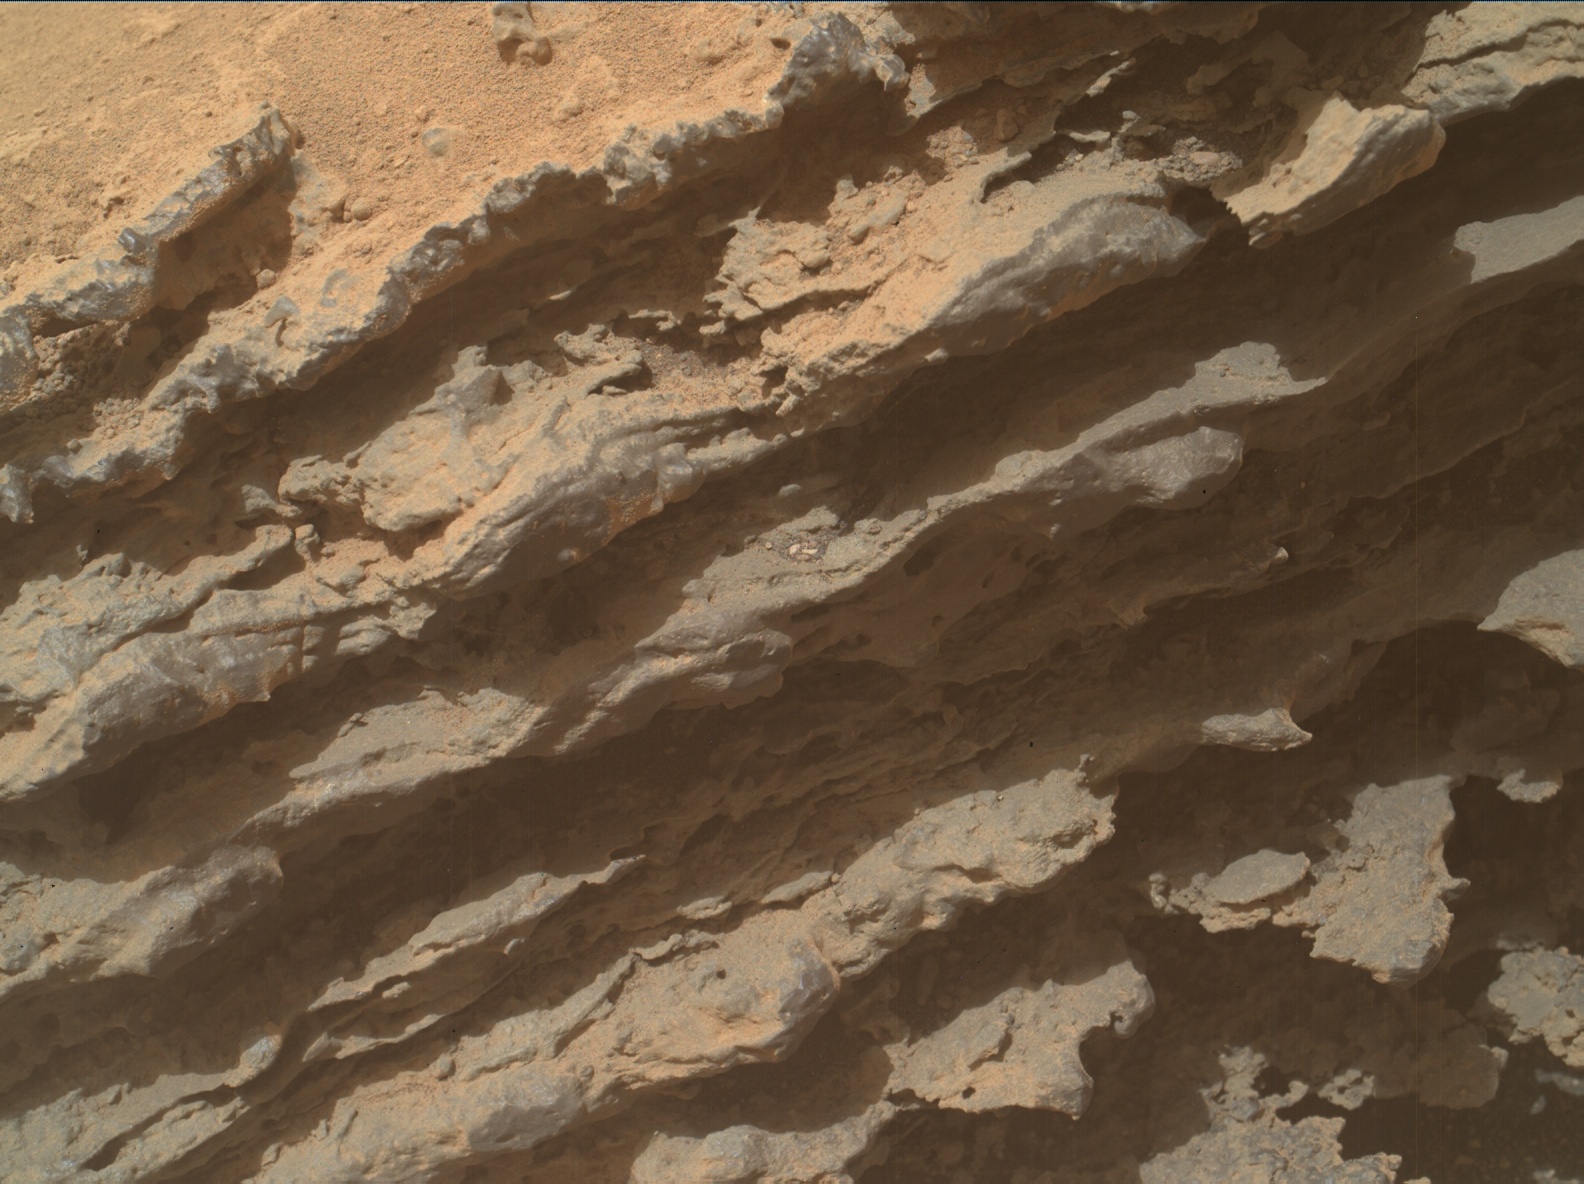 Nasa's Mars rover Curiosity acquired this image using its Mars Hand Lens Imager (MAHLI) on Sol 3644